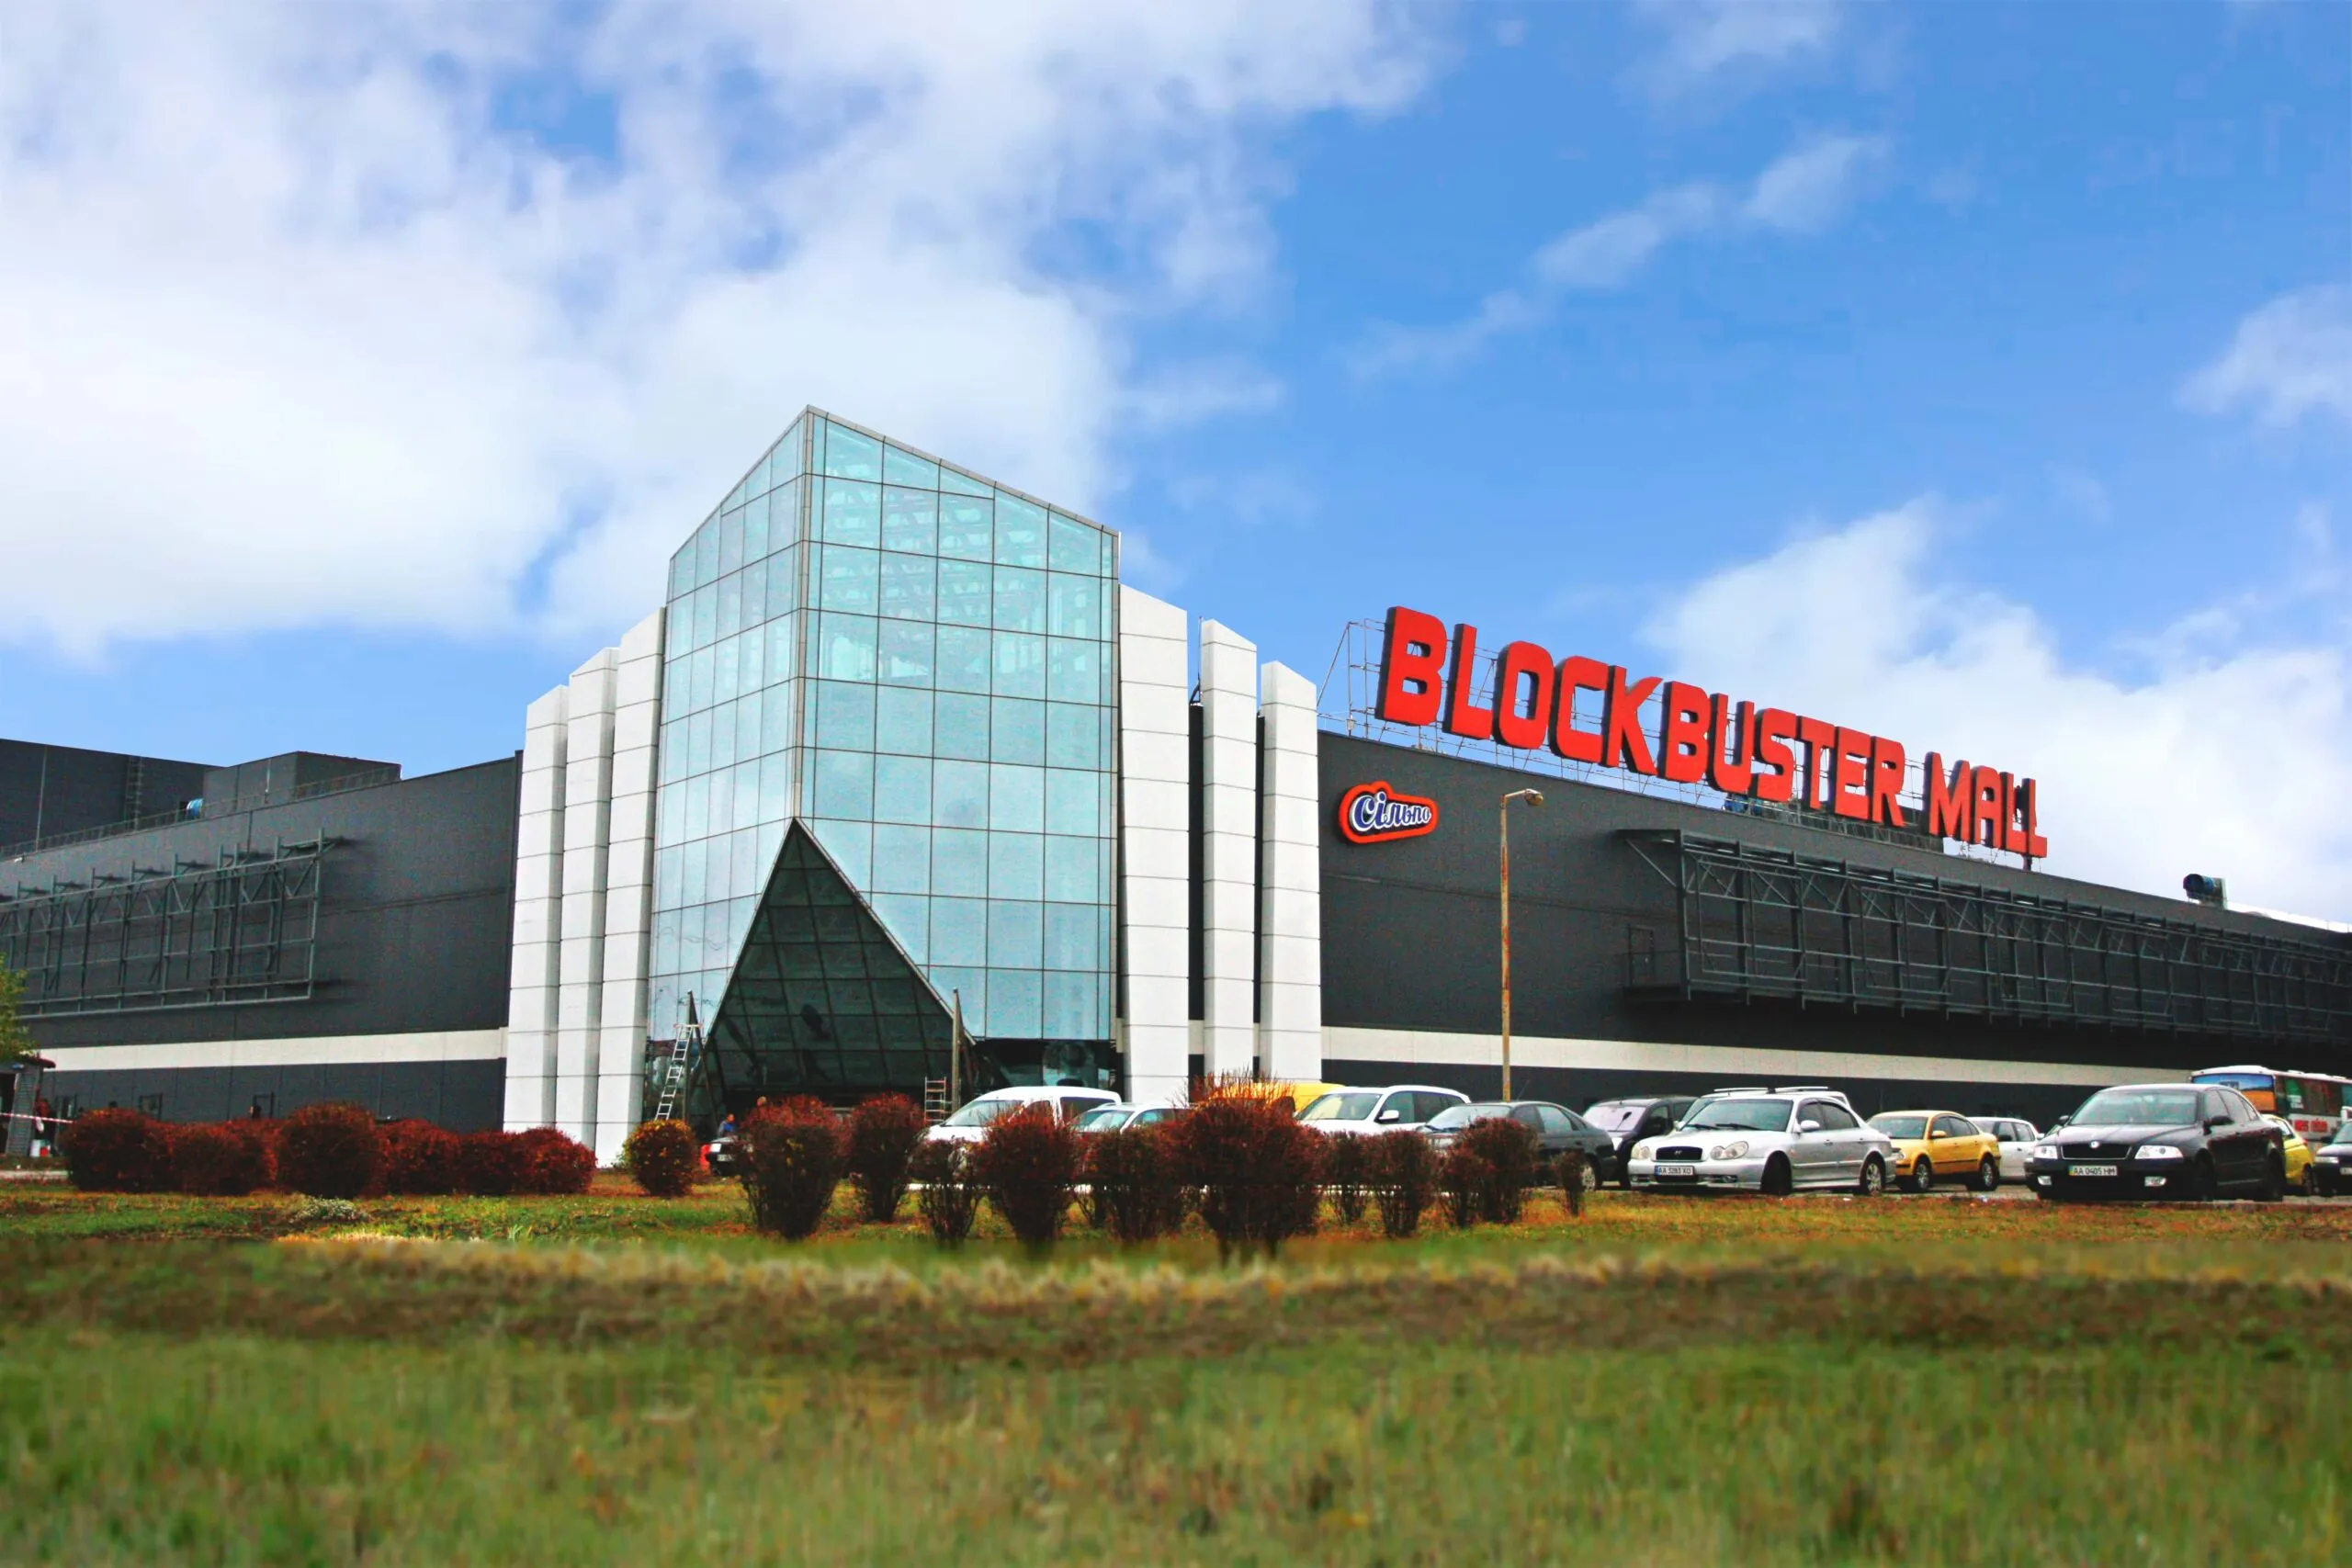 Blockbuster Mall in Ukraine, europe | Fragrance,Handbags,Shoes,Clothes,Sweets,Jewelry,Swimwear - Country Helper